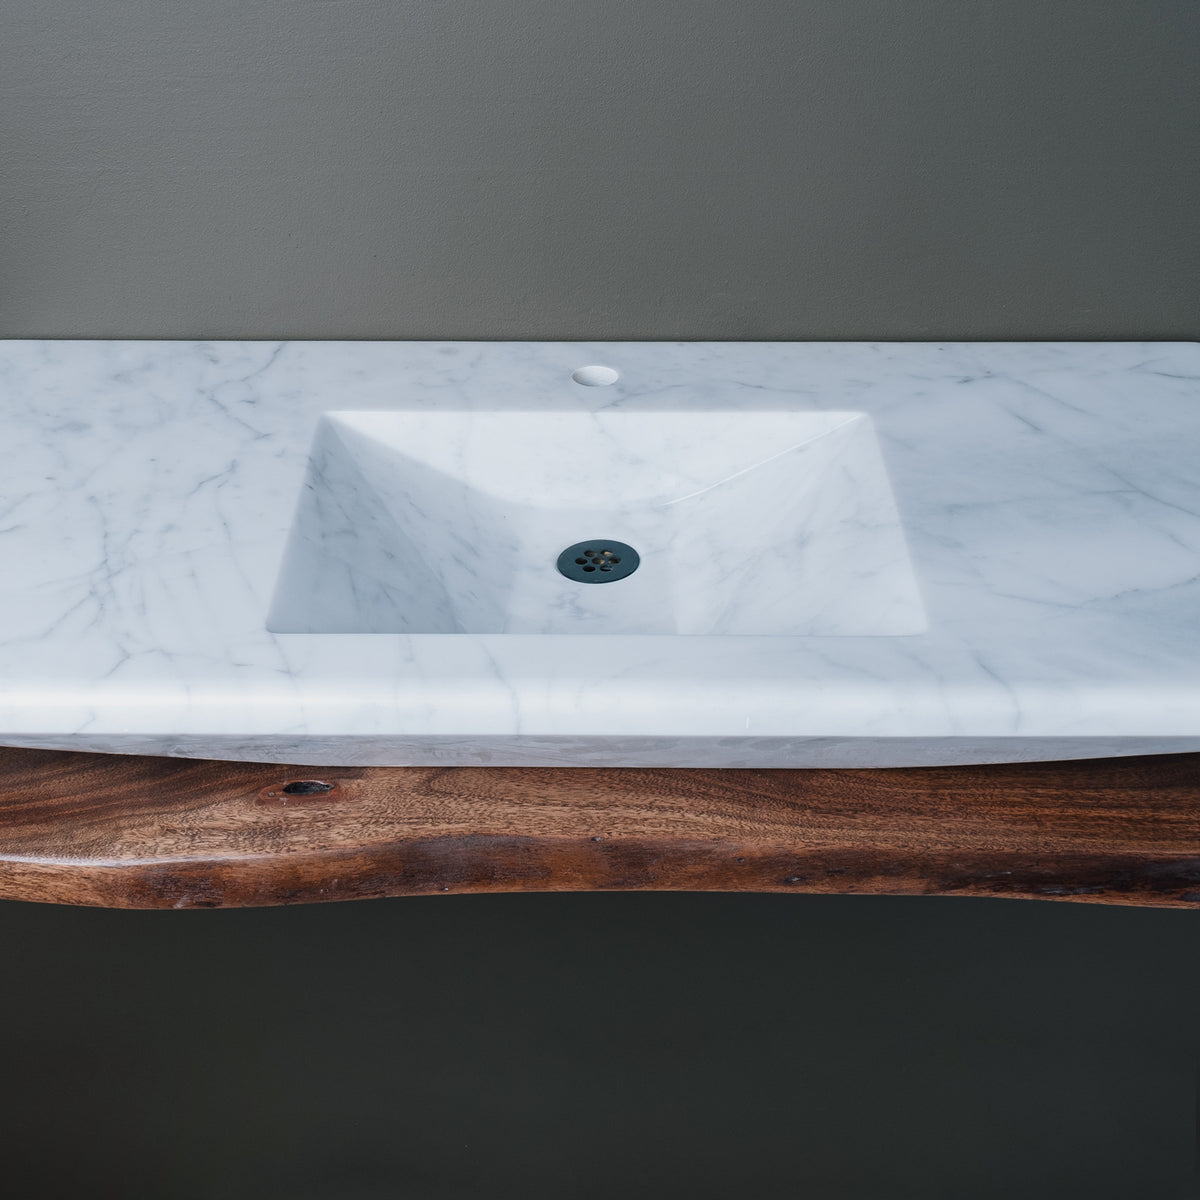 Stone Forest Cortina Console Sink in honed carrara marble image 2 of 4